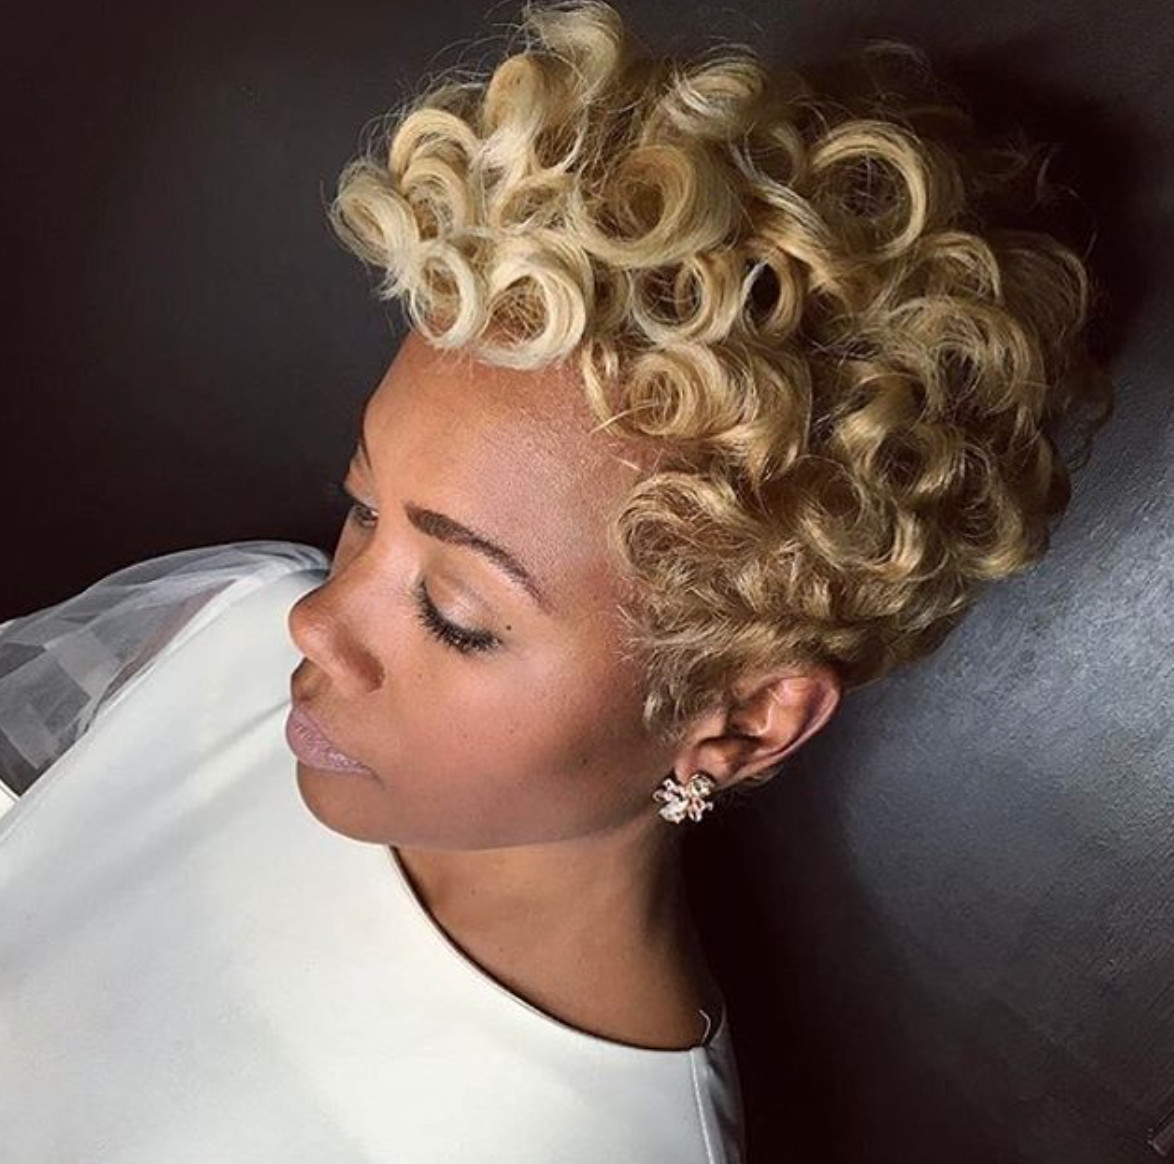 Pin Curl Hairstyles For Black Hair
 Lovely blonde pin curls by khimandi Black Hair Information